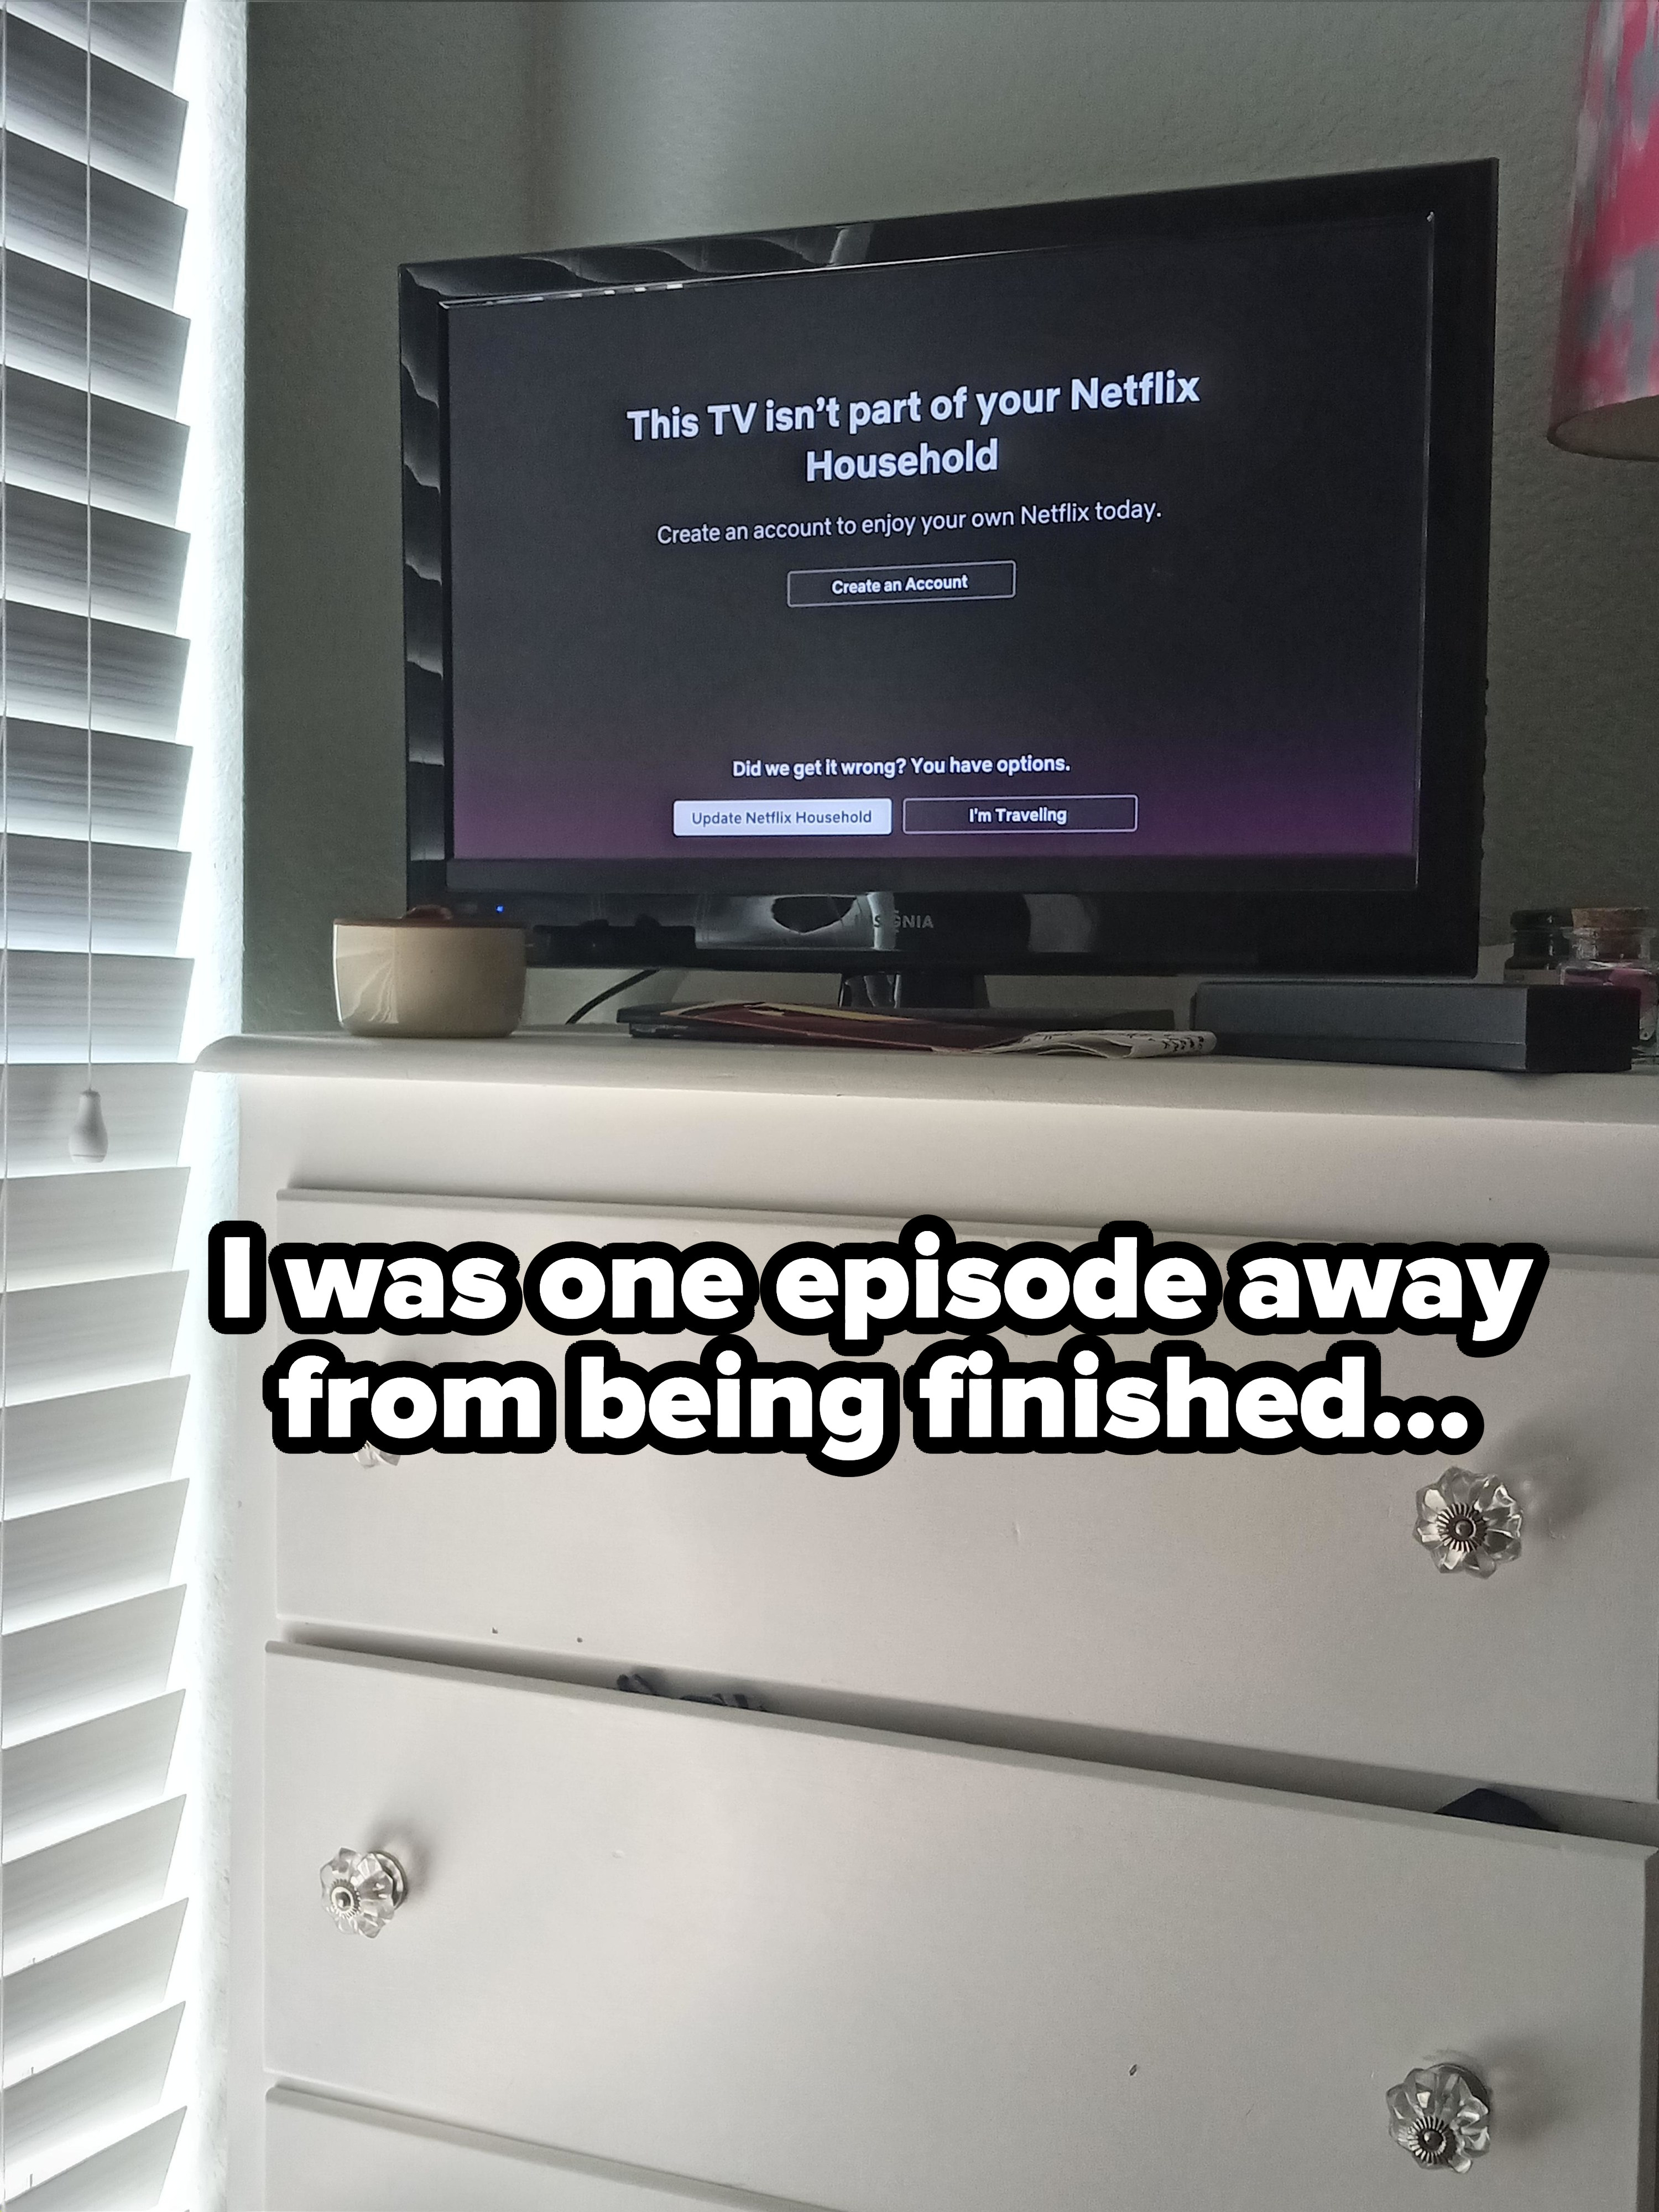 &quot;I was one episode away from being finished...&quot;